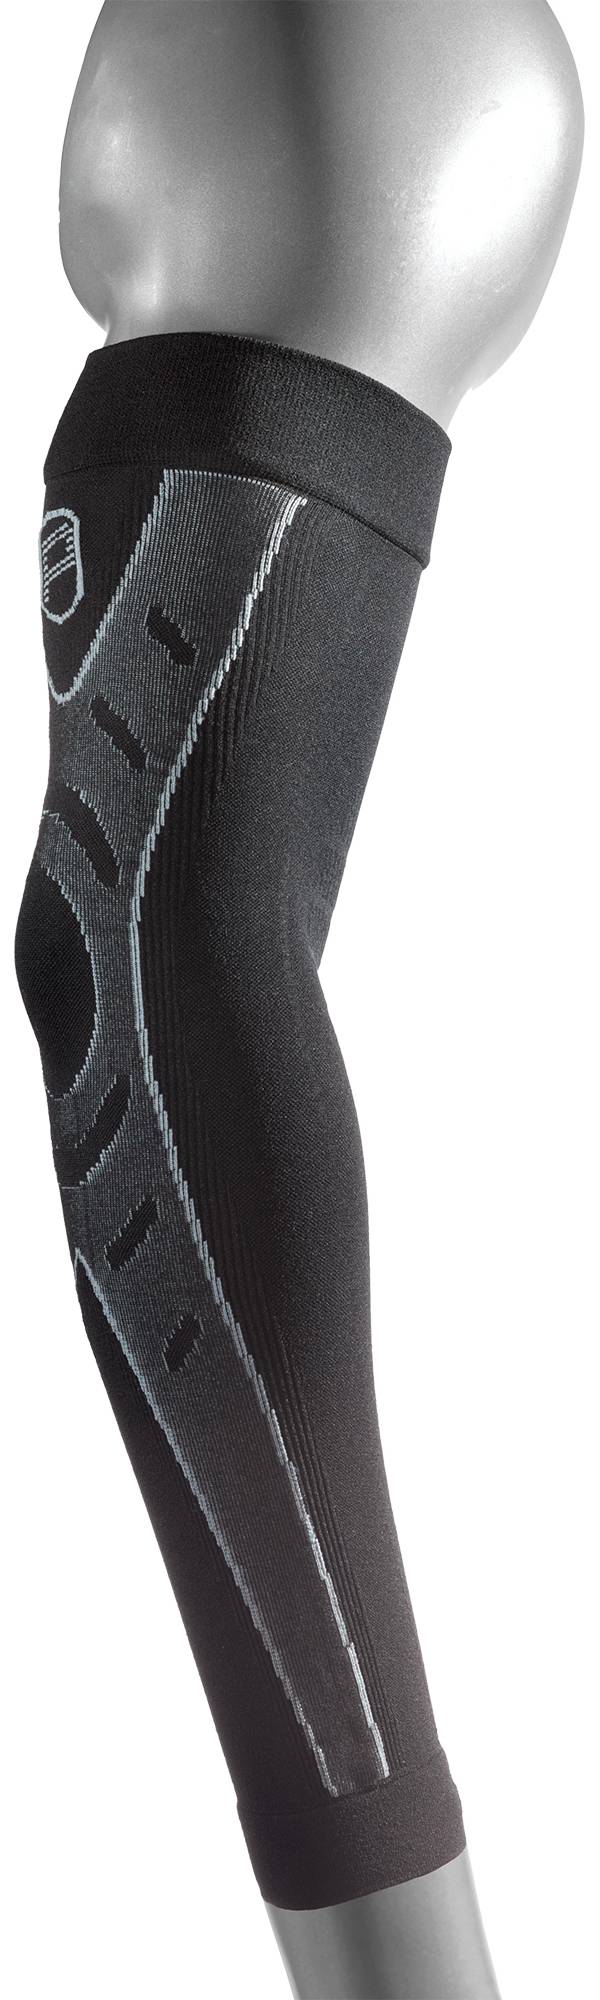 P-TEX PRO Knit Compression Arm Sleeve product image